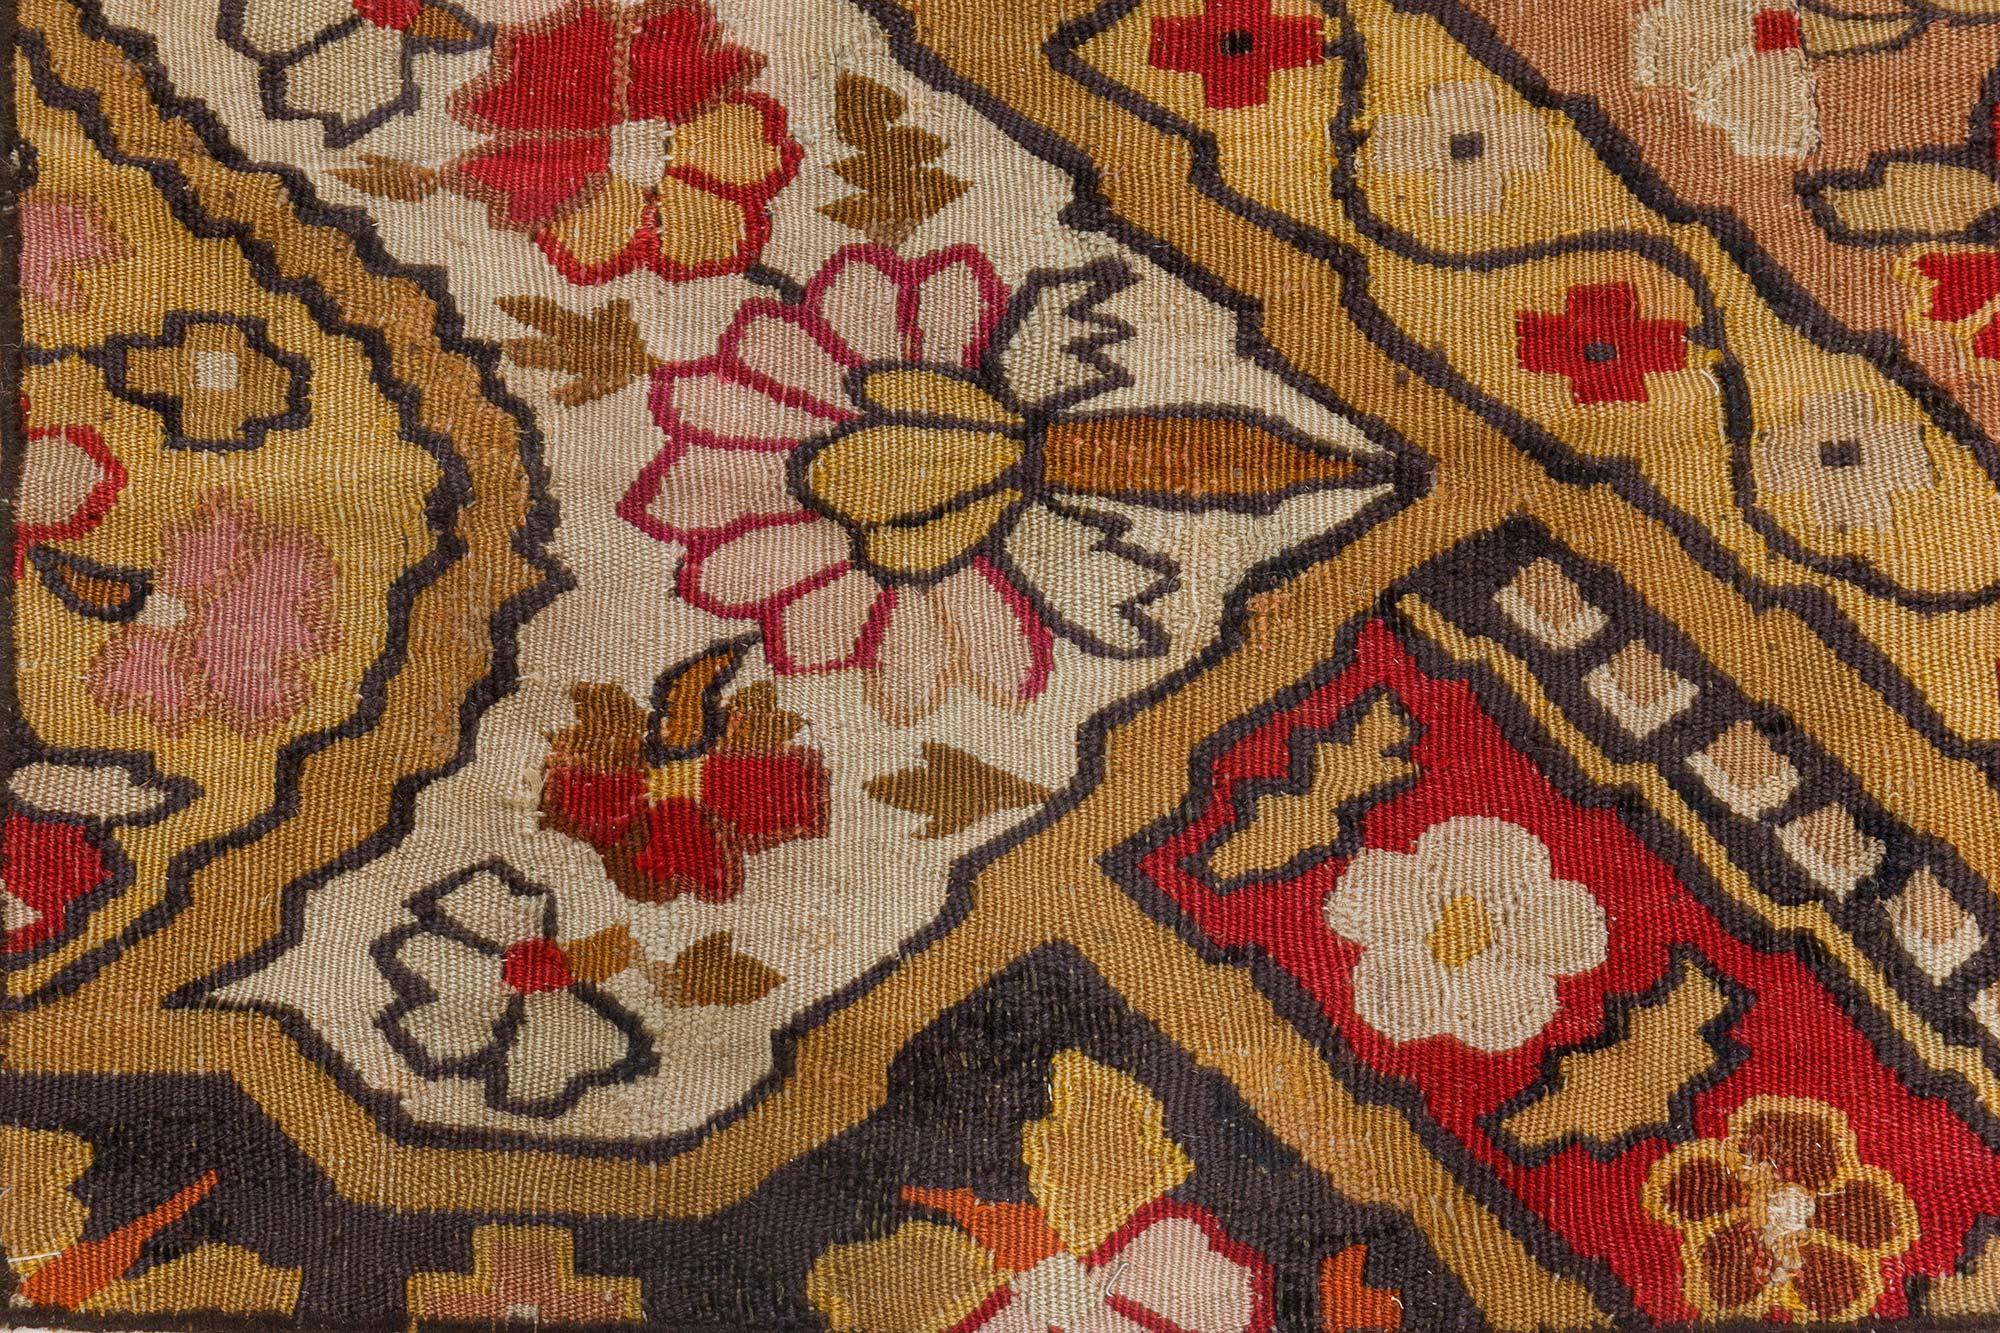 Authentic 19th Century French Aubusson Handmade Rug In Good Condition For Sale In New York, NY